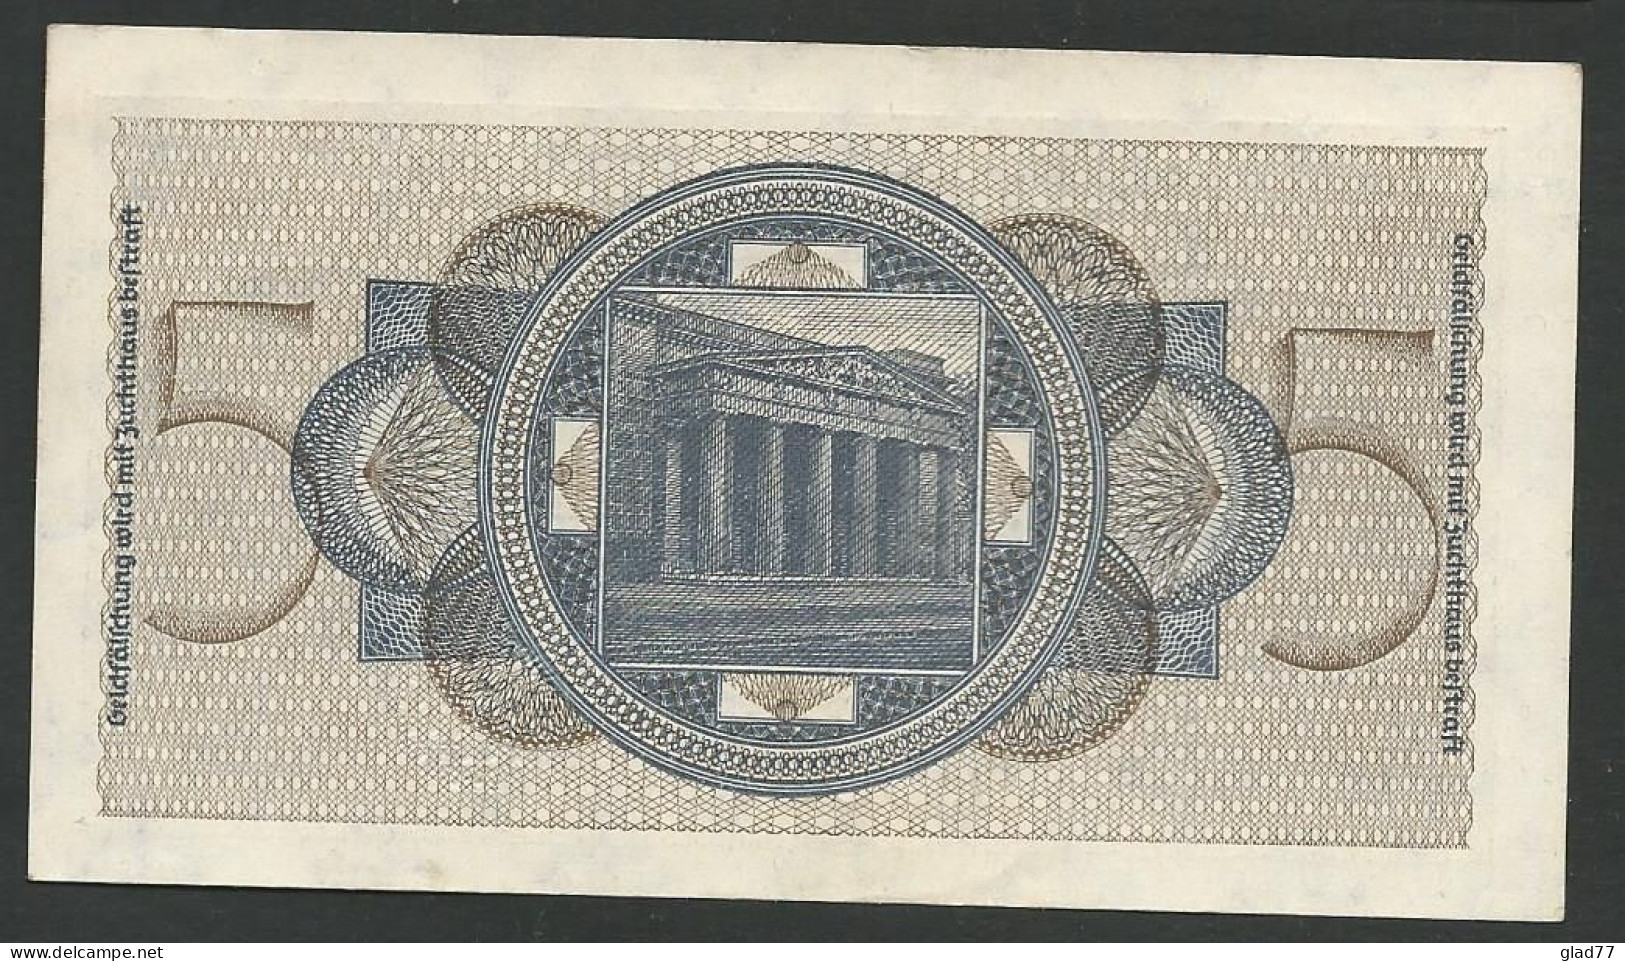 5 Reichsmark 1943 WWII Circulated In Greece (during Occupation) Choice UNC! - 10 Reichsmark